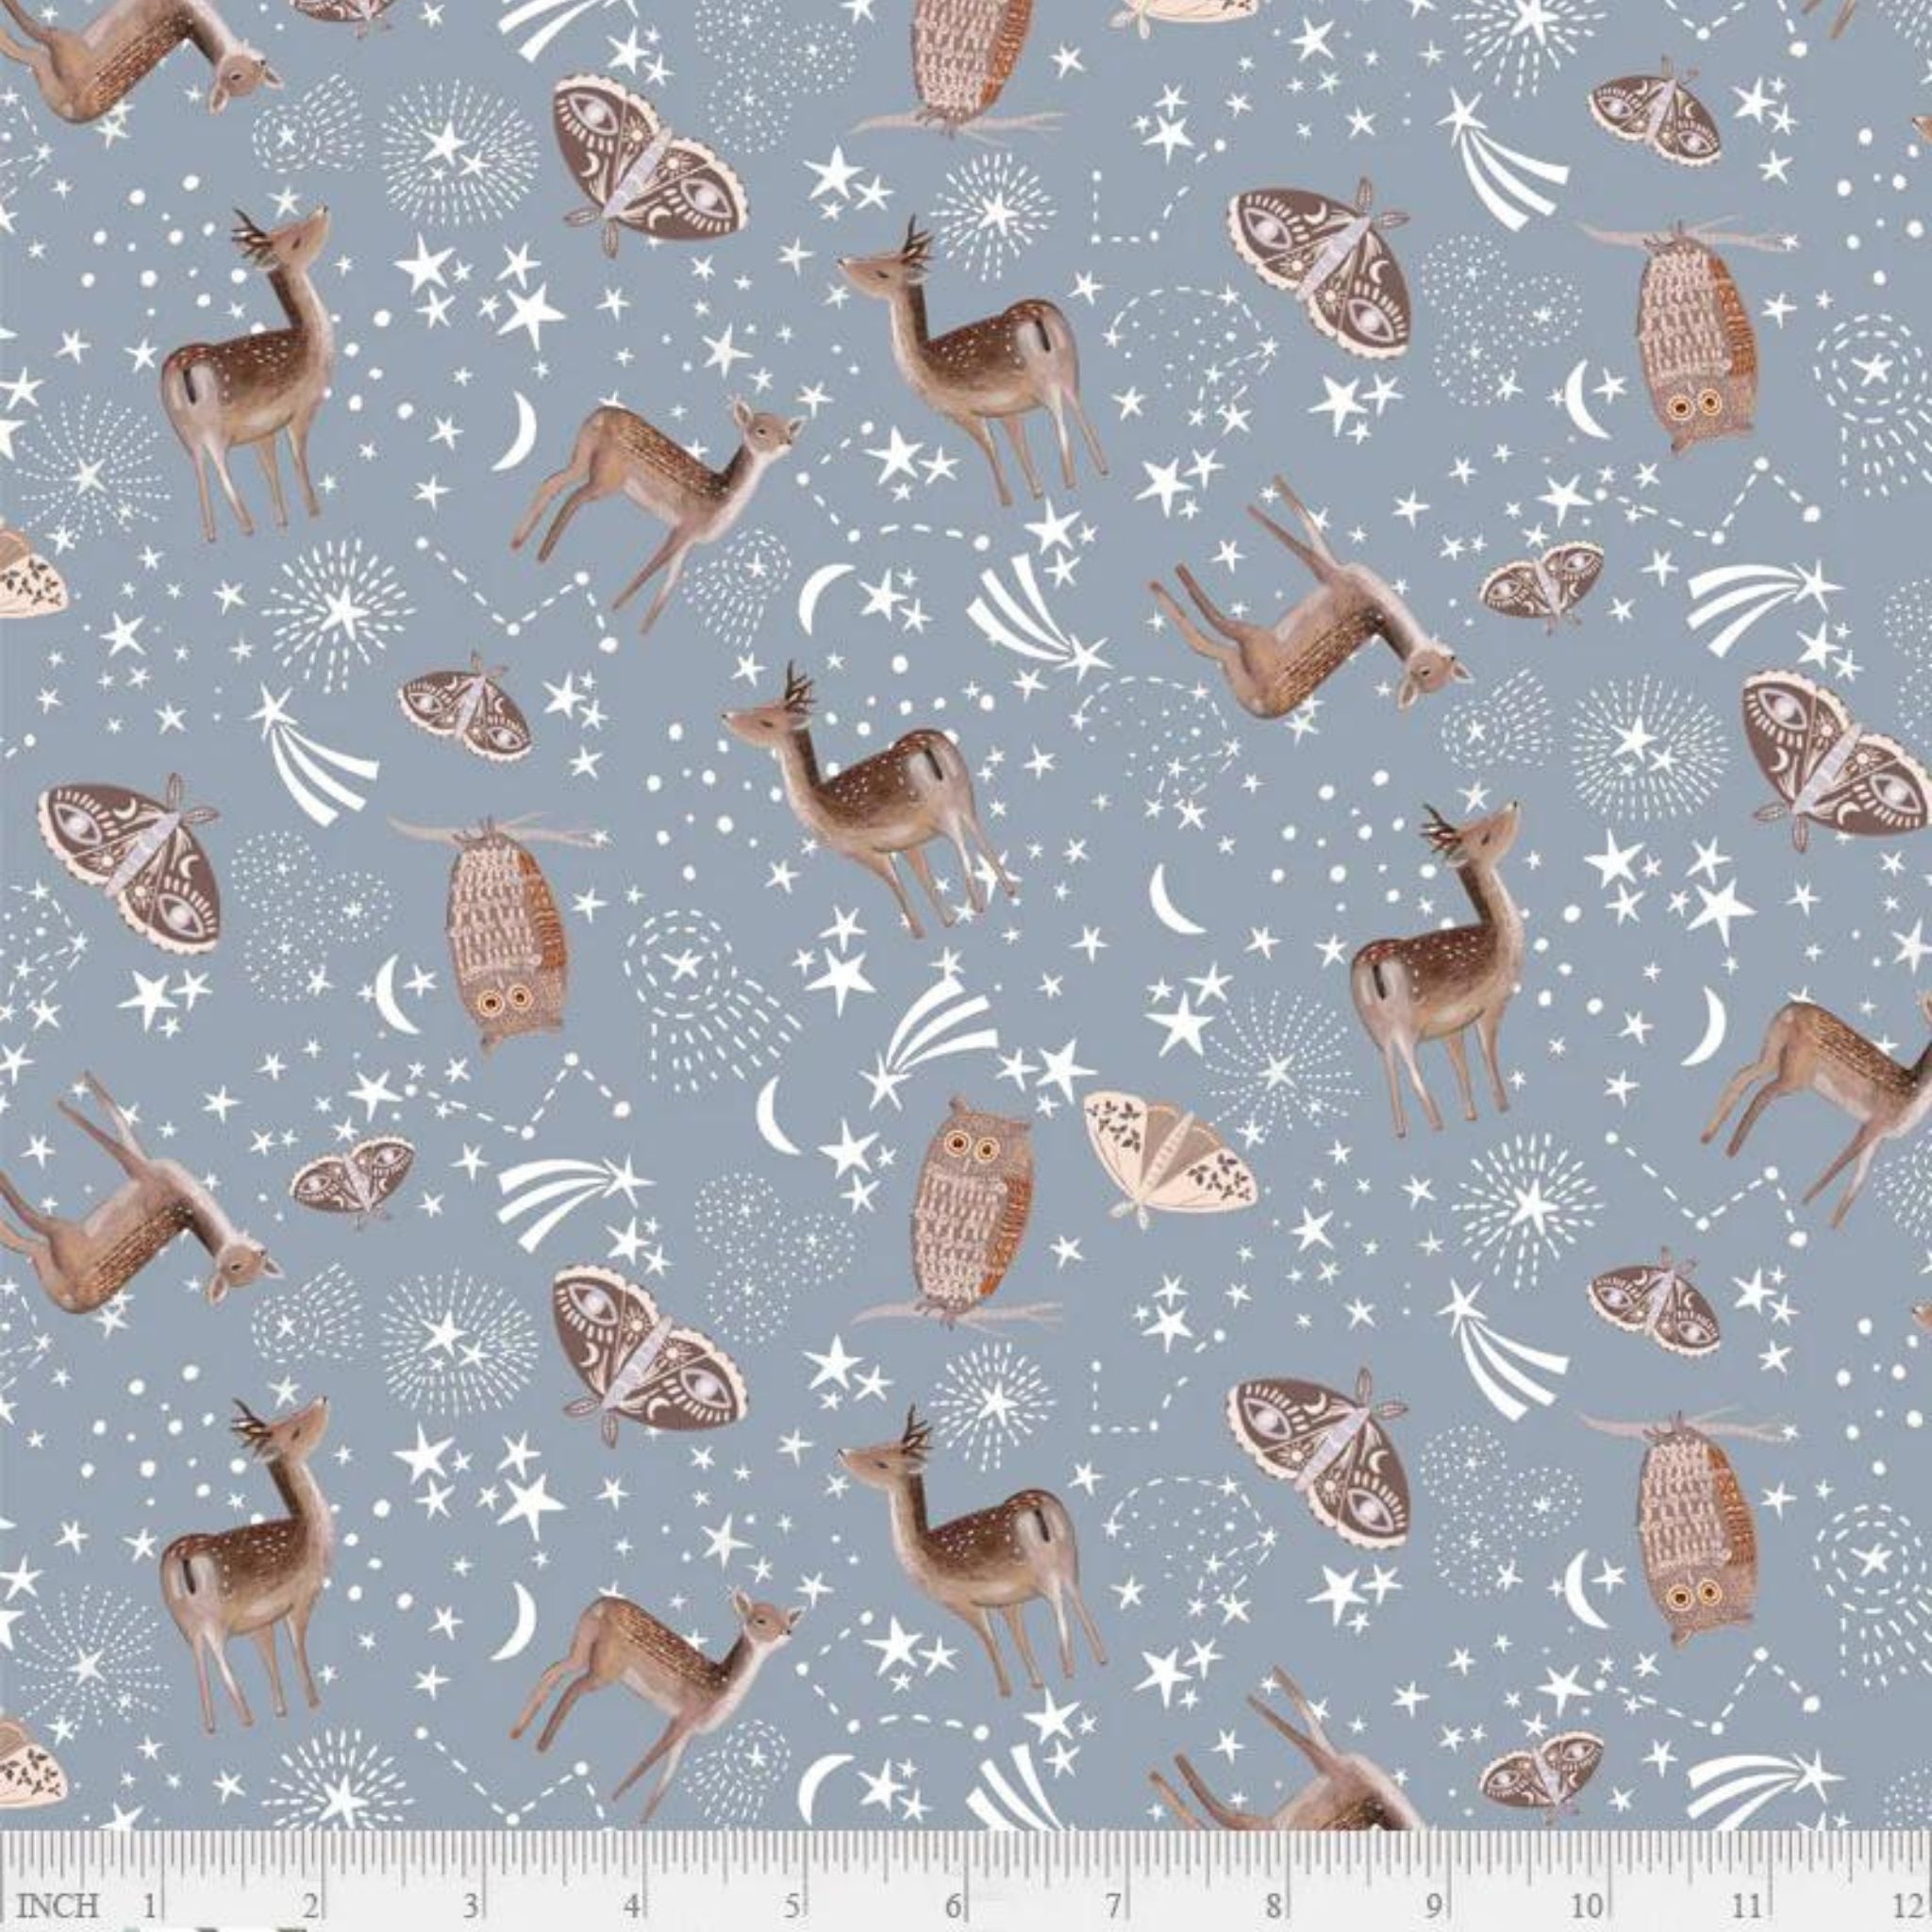 Deer under the night sky with owls and moths - Fawn'd of You by P & B Fabrics